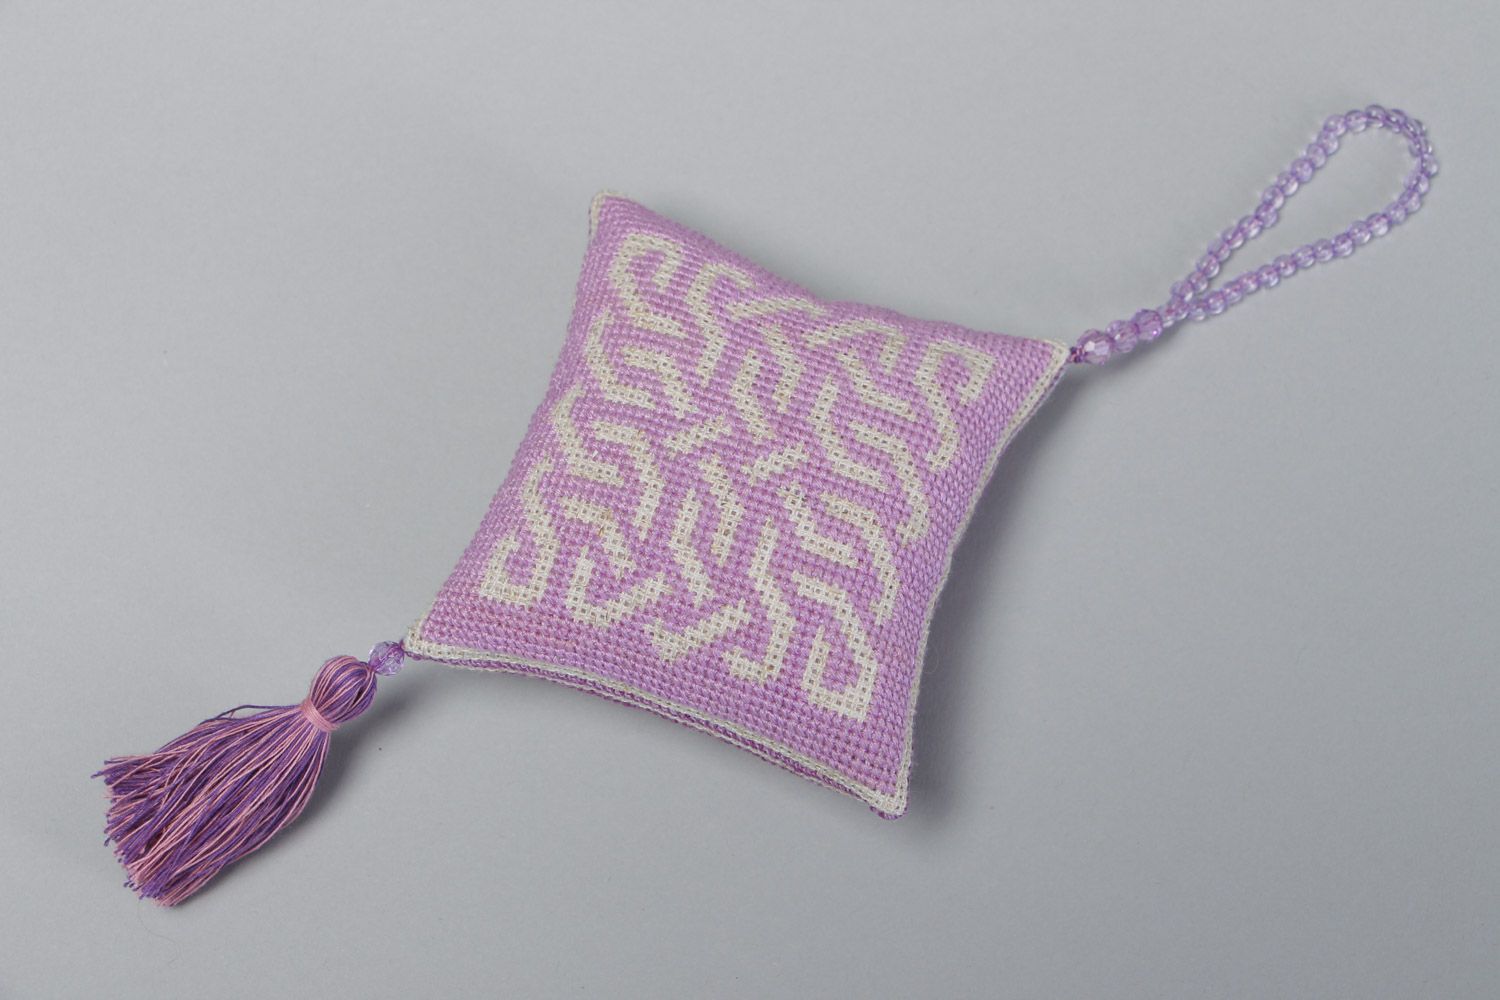 Handmade violet fabric pincushion with cross stitch embroidery and tassels photo 3